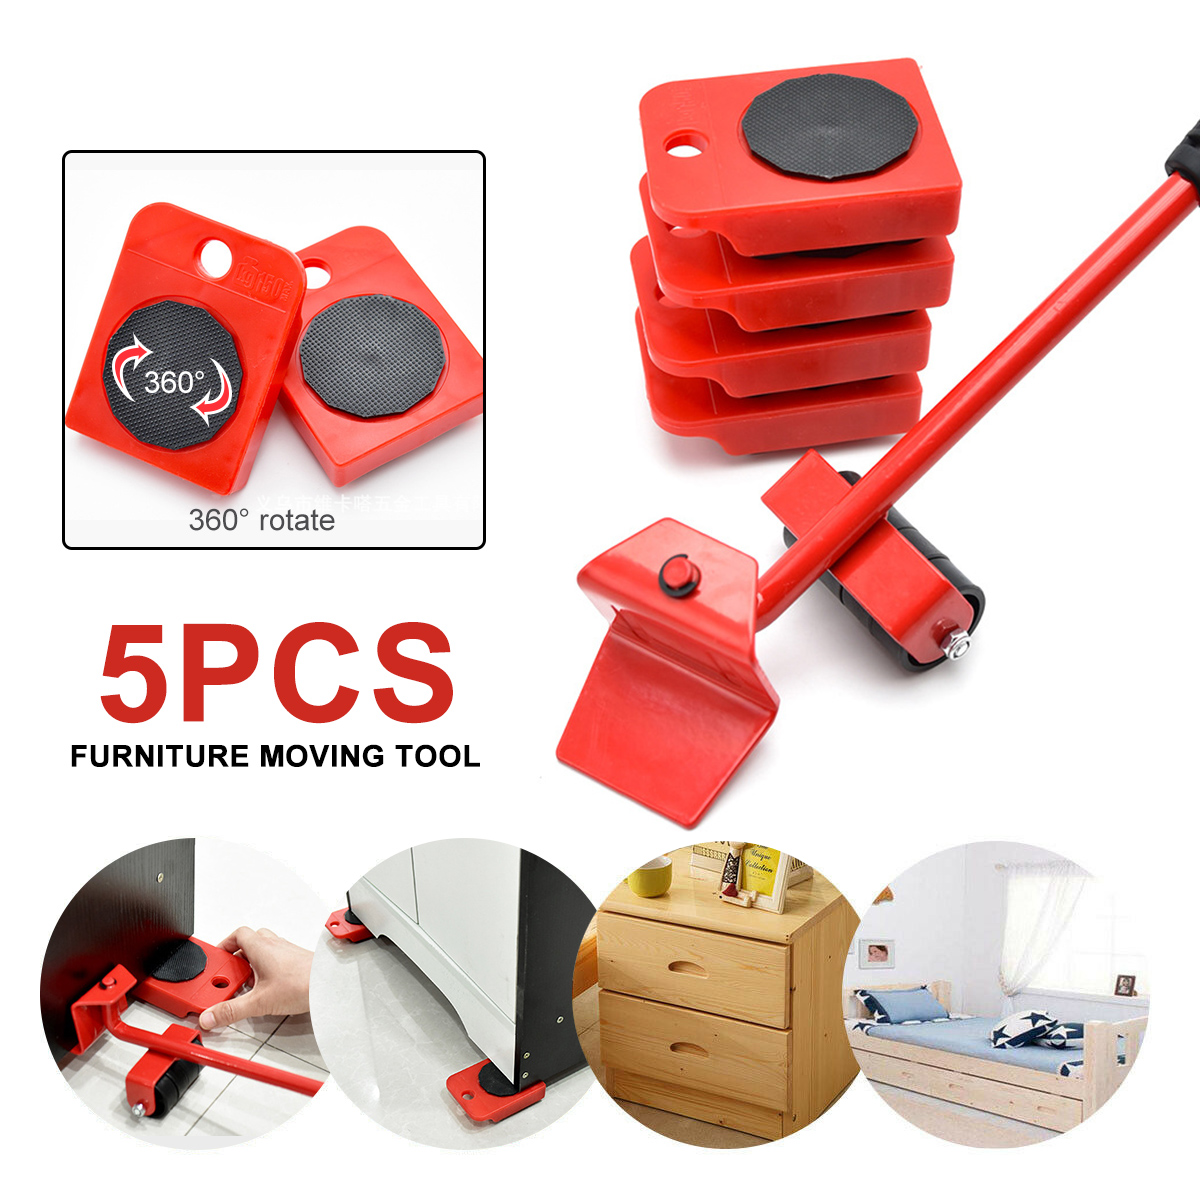 5PCS-Furniture-Lifter-Easy-Moving-Sliders-Mover-Tool-Set-Roller-Move-Tools-1849086-2